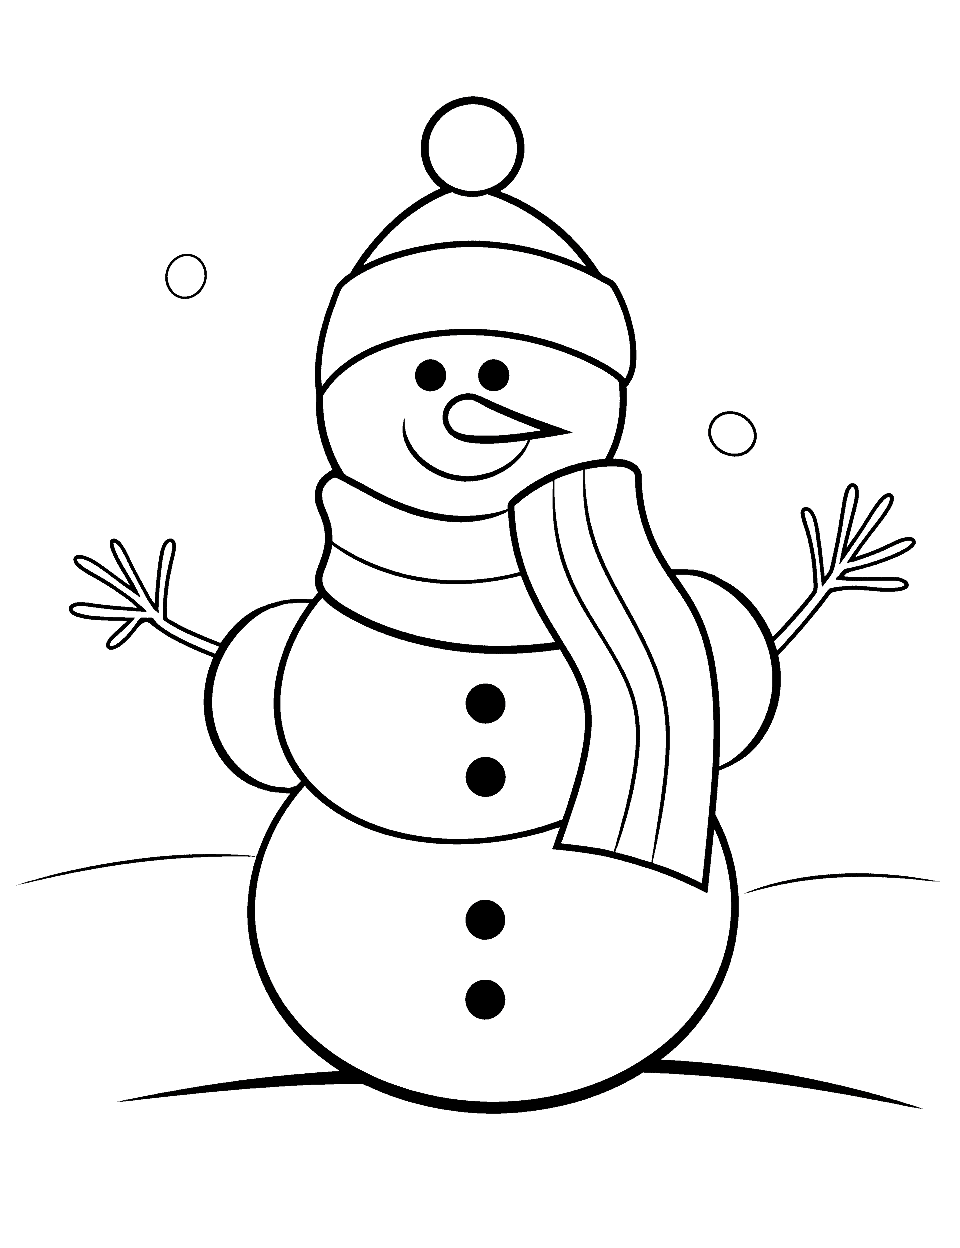 Simple Snowman Winter Coloring Page - A large, simple snowman outline that’s perfect for younger children to color.